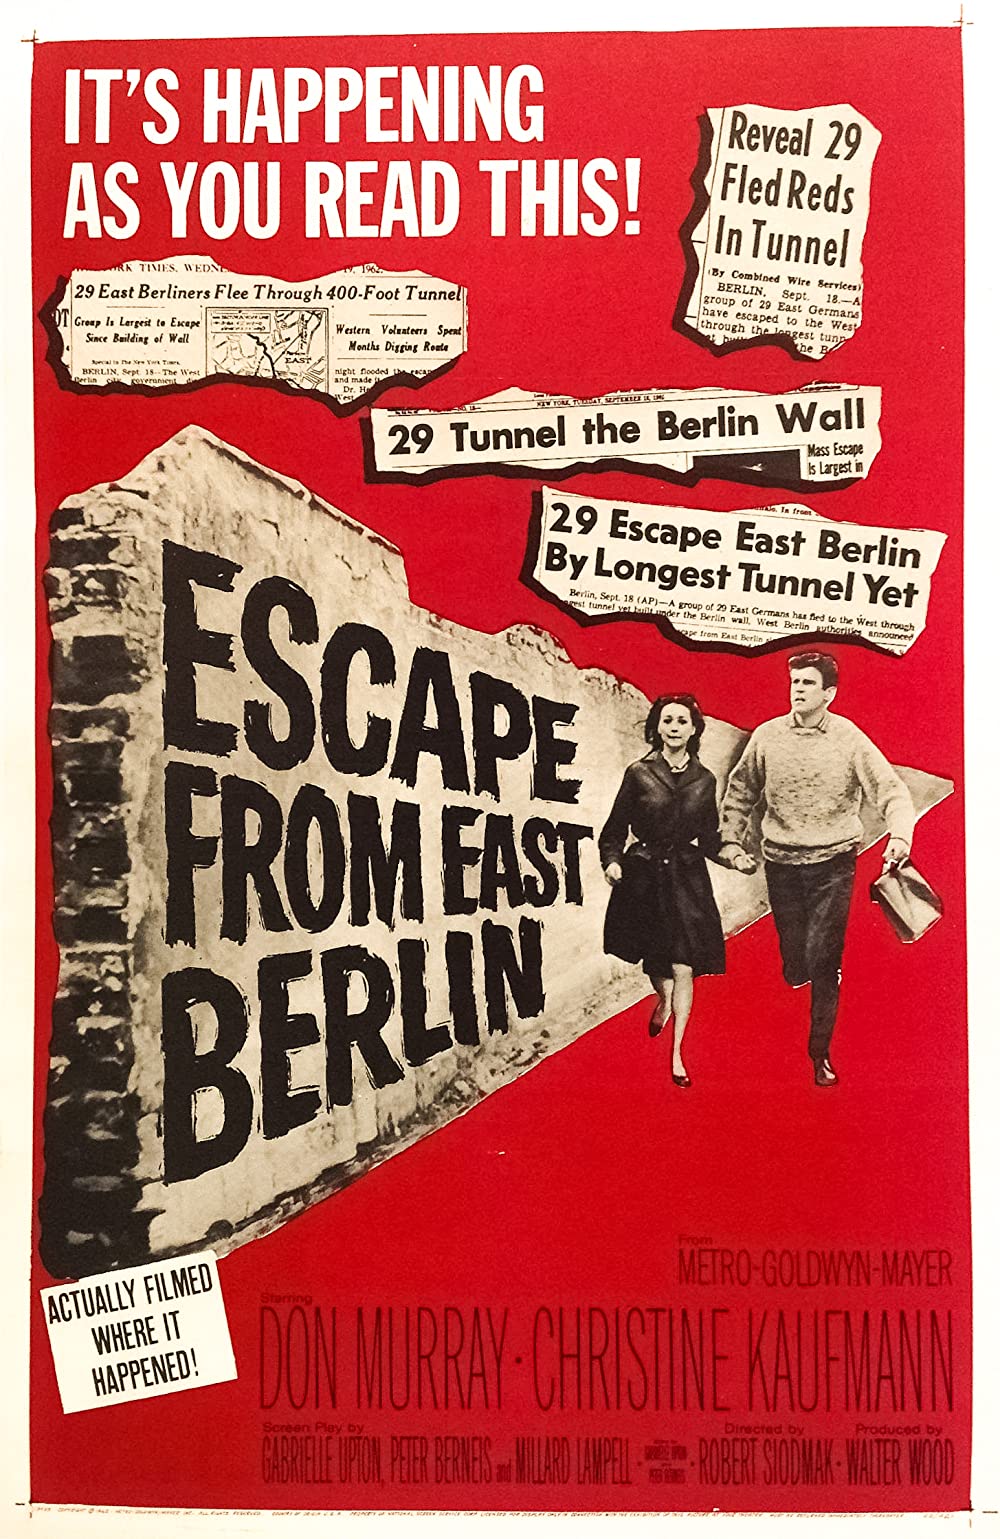 Escape From East-Berlin - Tunnel 28